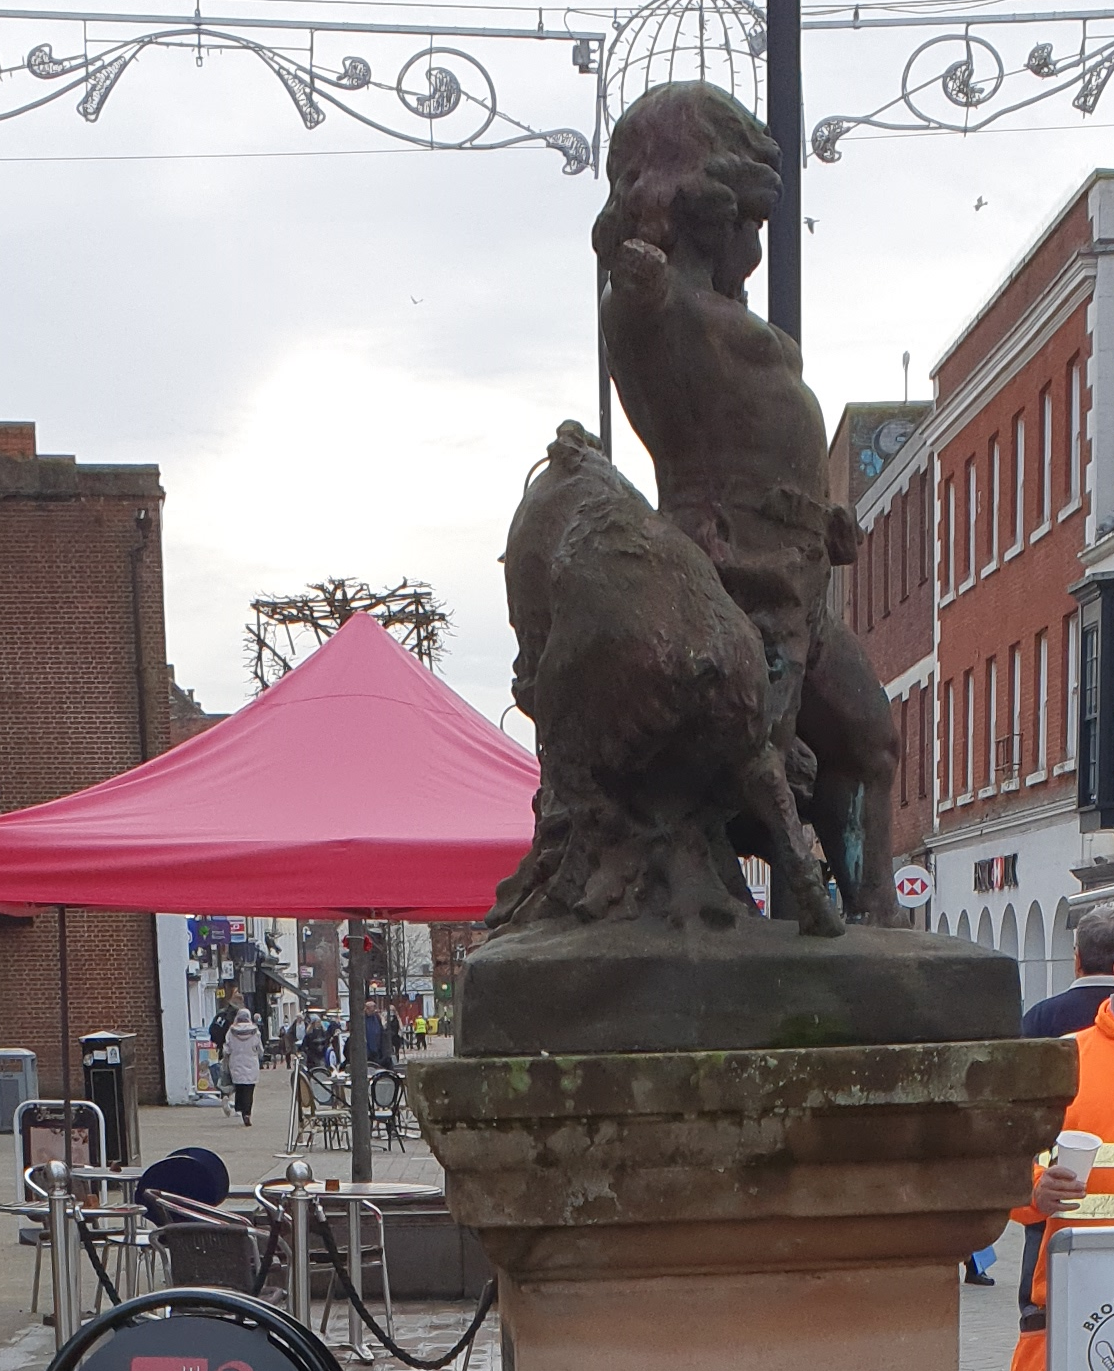 High Street’s Dryad and Boar gets some much-needed TLC